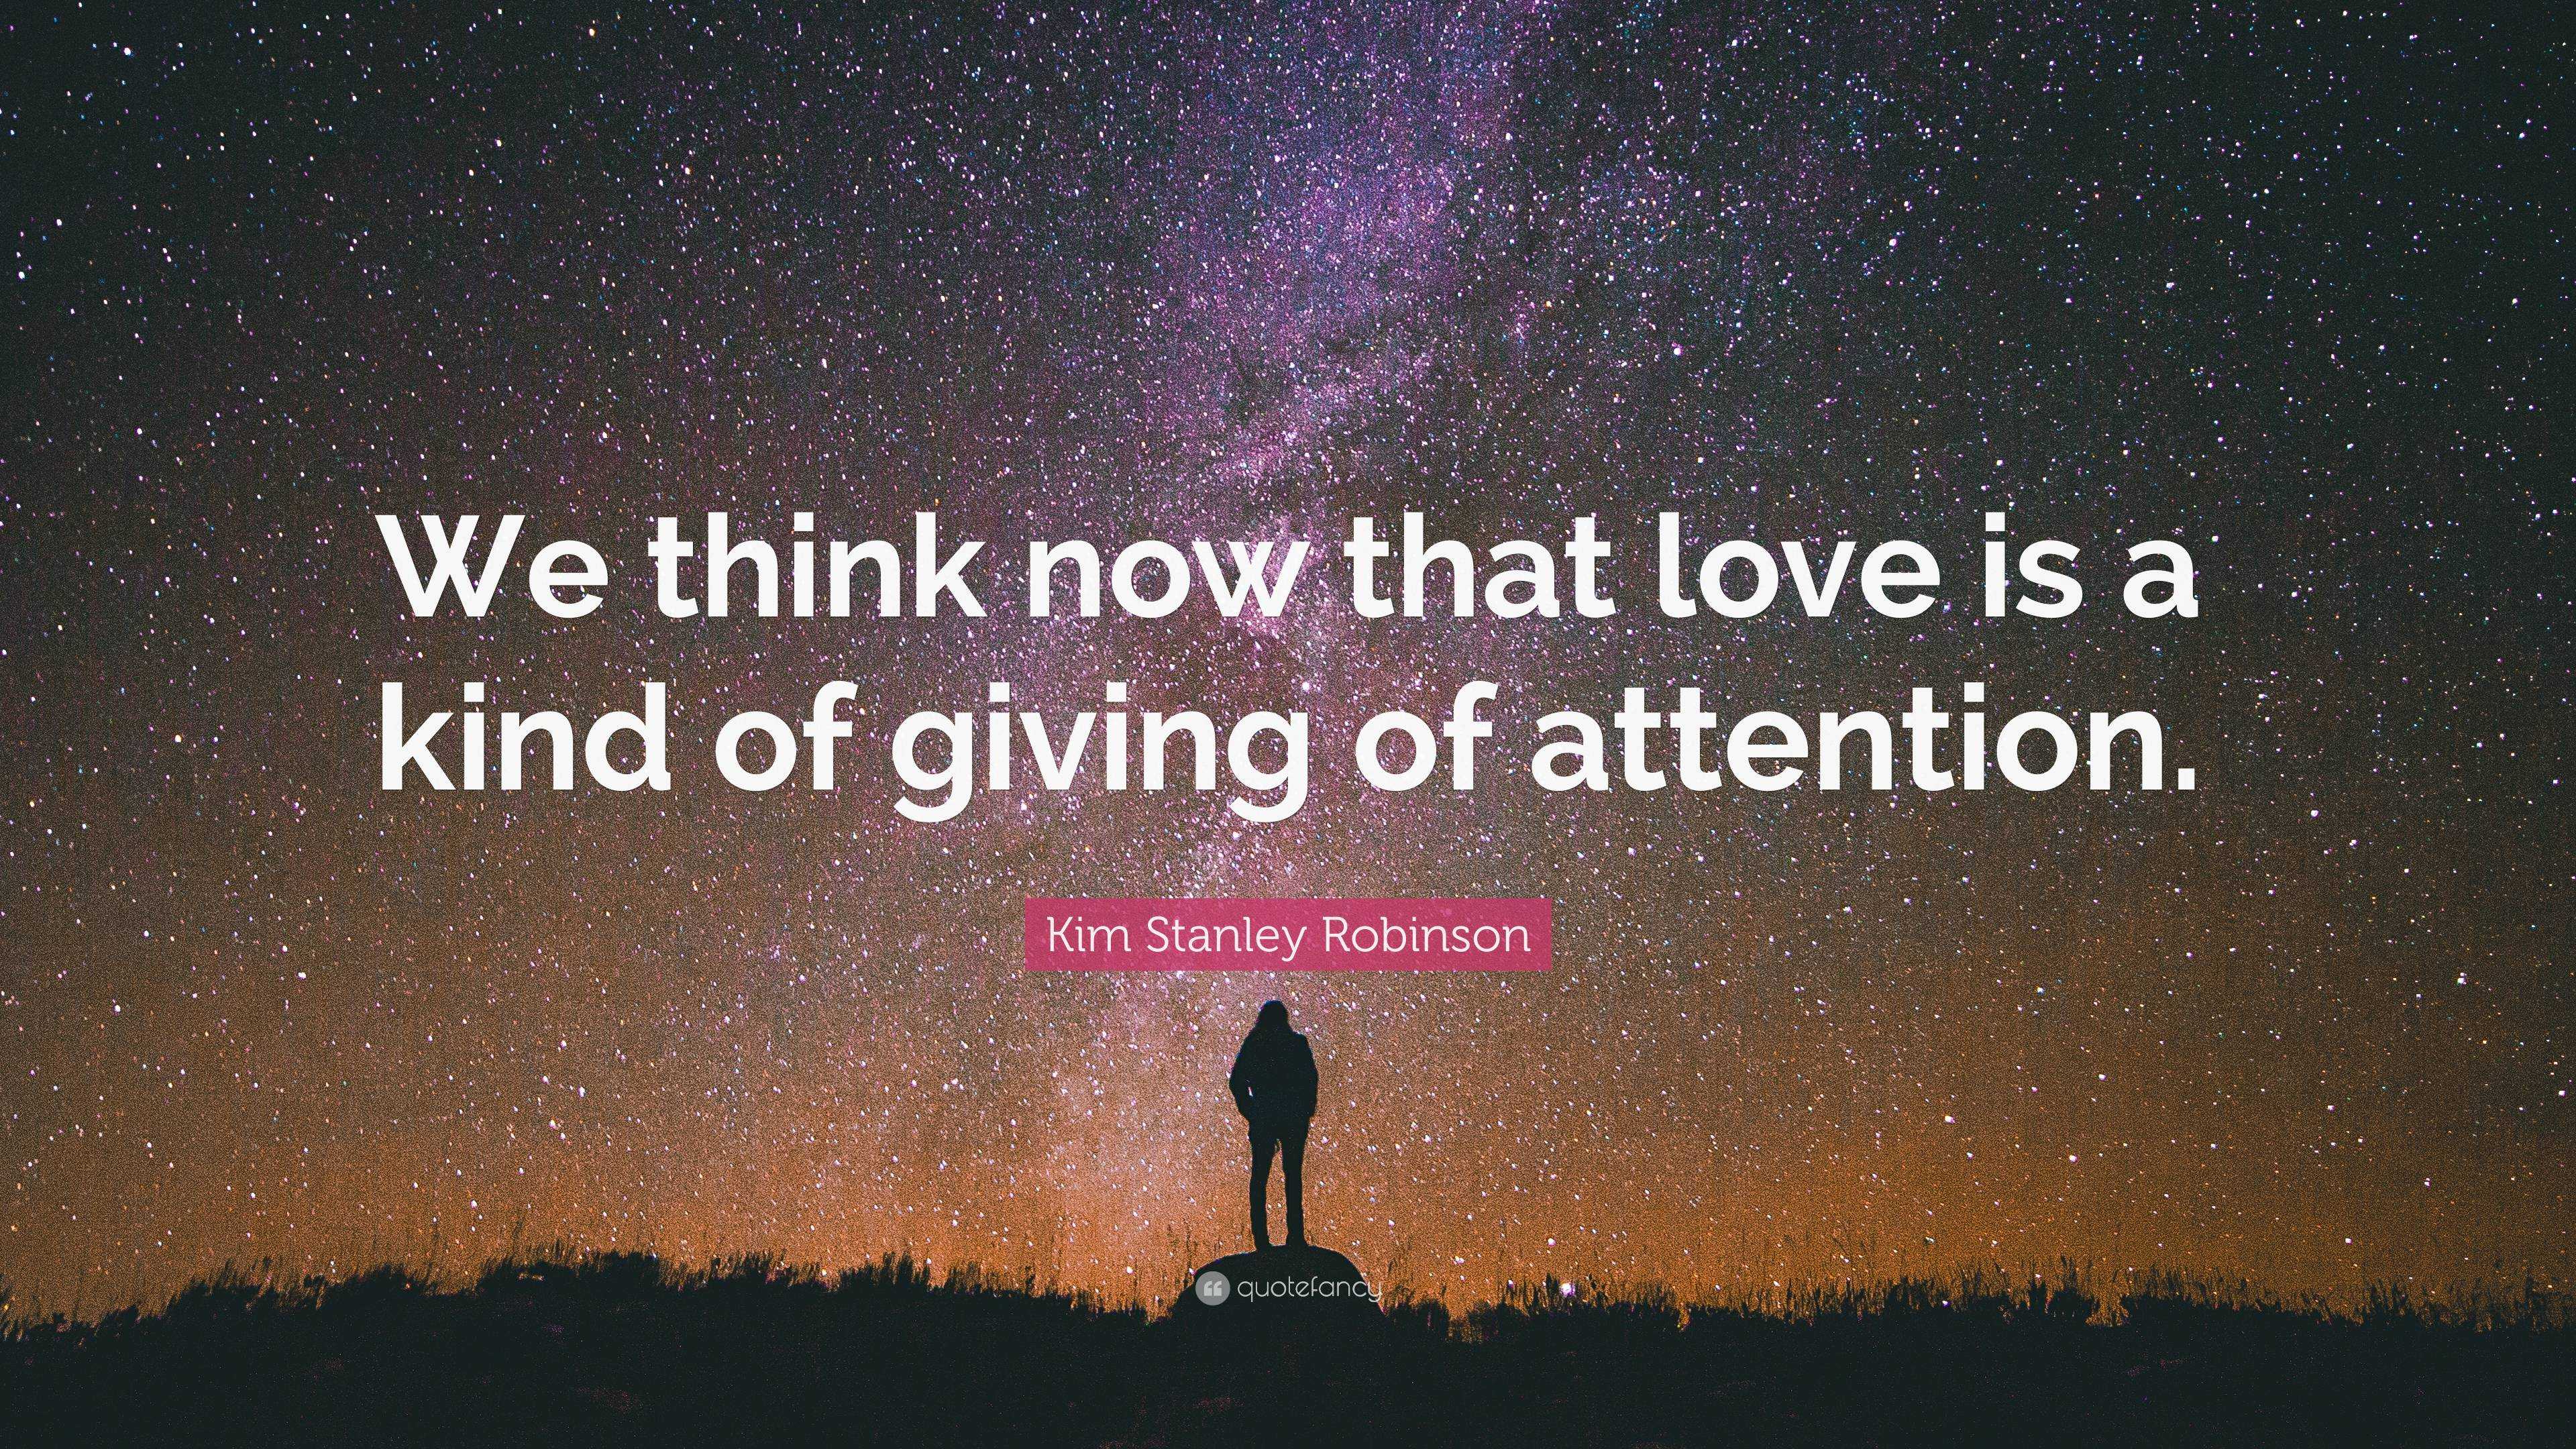 Kim Stanley Robinson Quote “we Think Now That Love Is A Kind Of Giving Of Attention” 